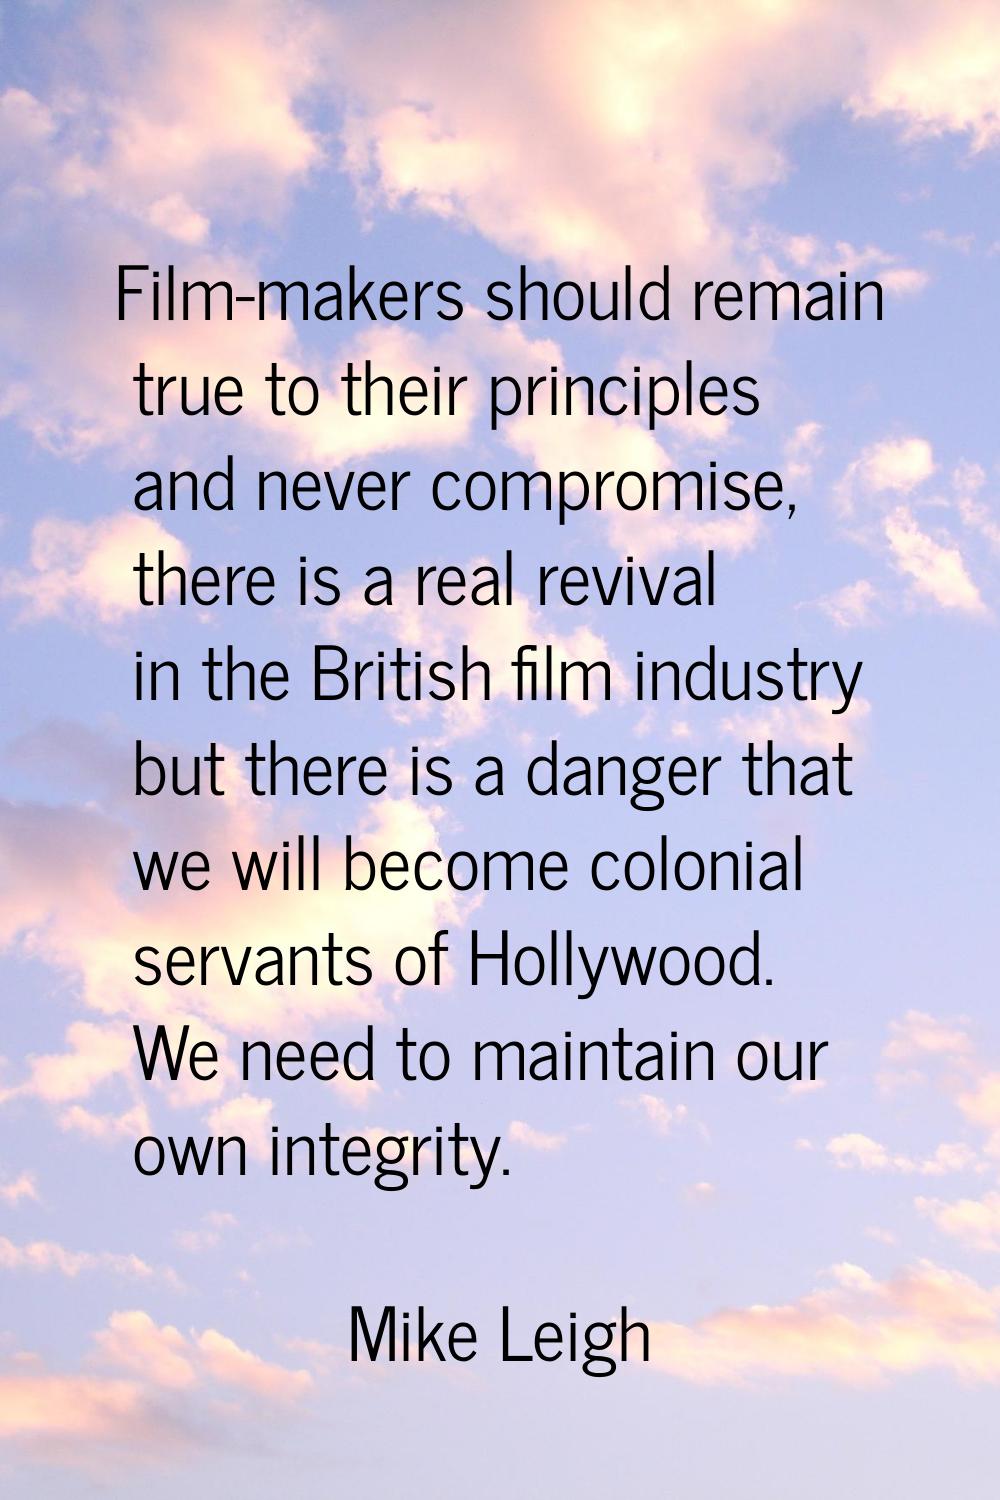 Film-makers should remain true to their principles and never compromise, there is a real revival in